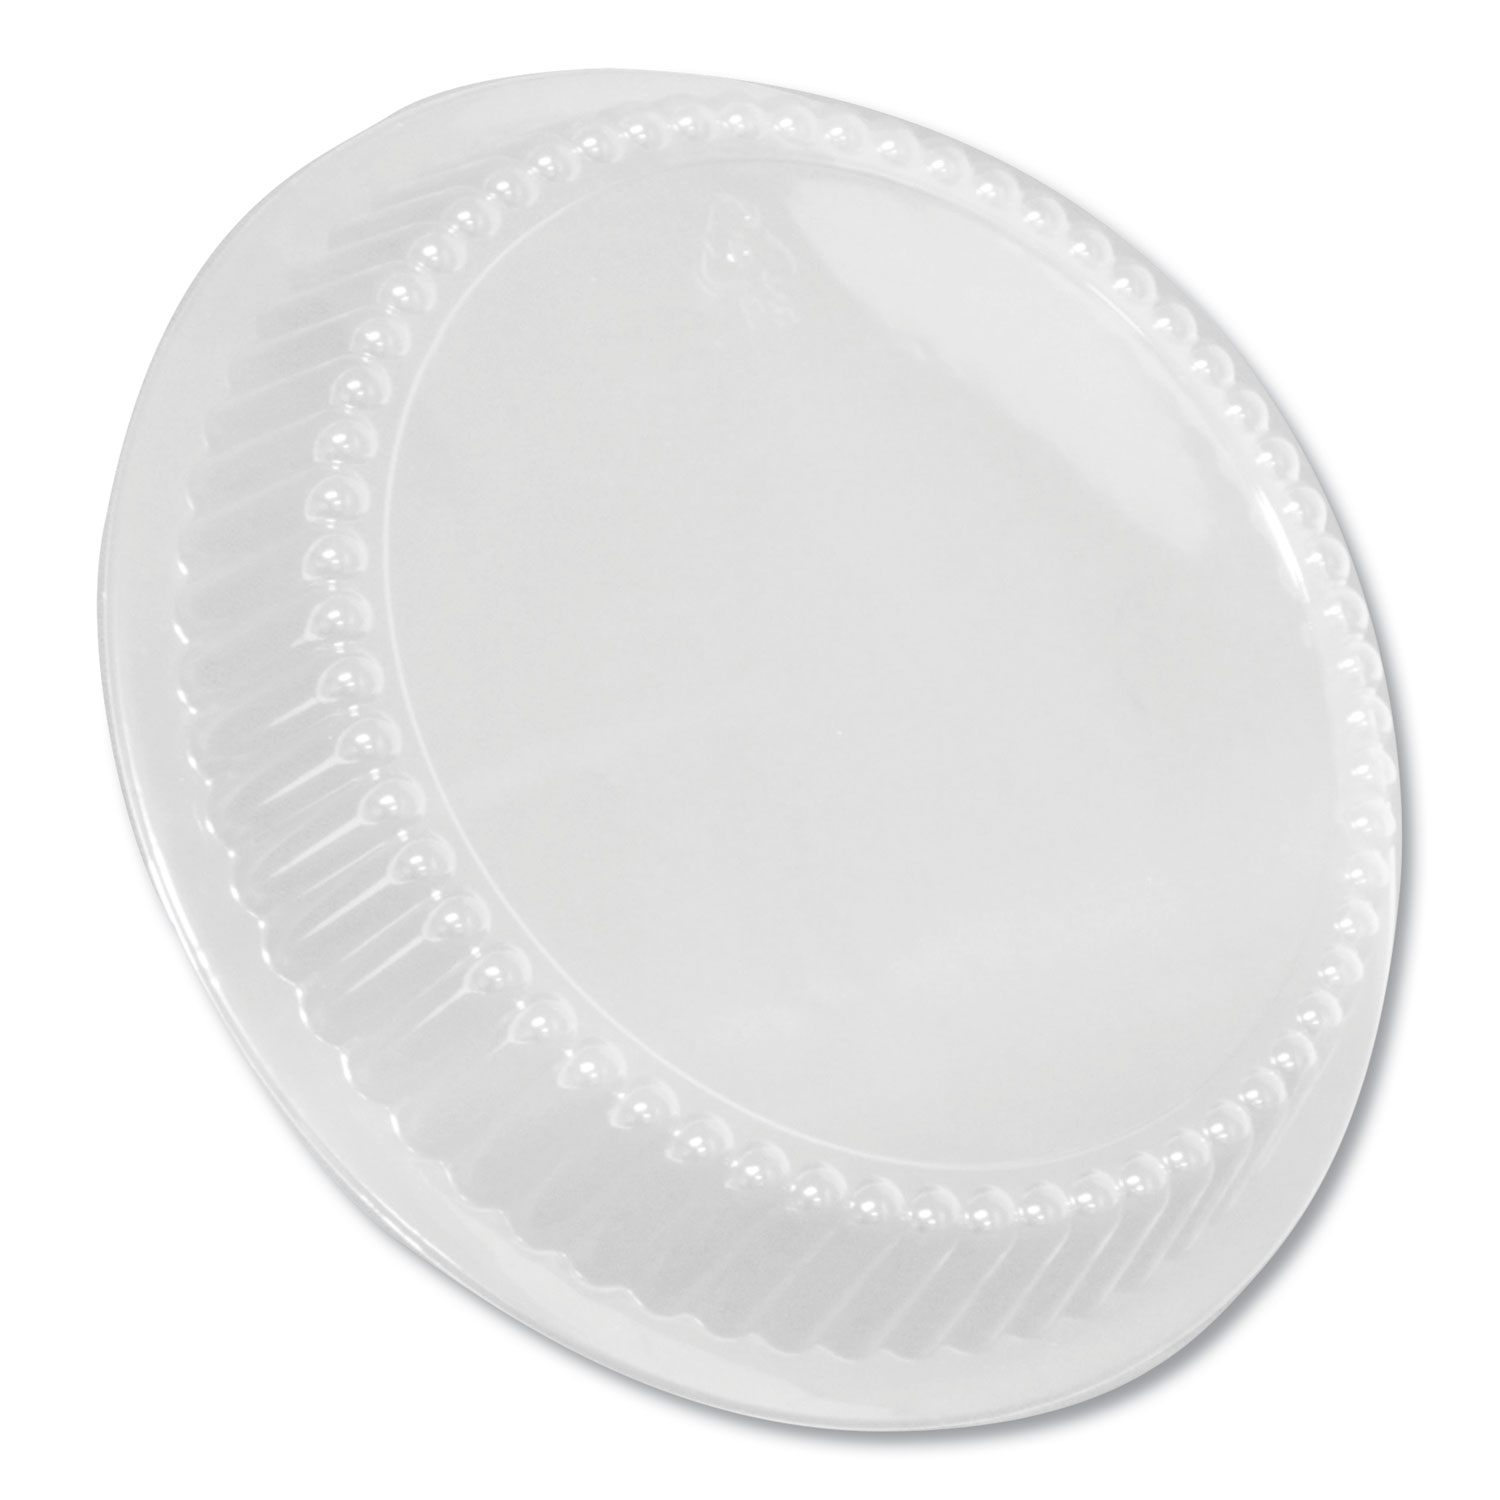  Durable Packaging P280500 Dome Lids for 8 Round Containers, 500/Carton (DPKP280500) 